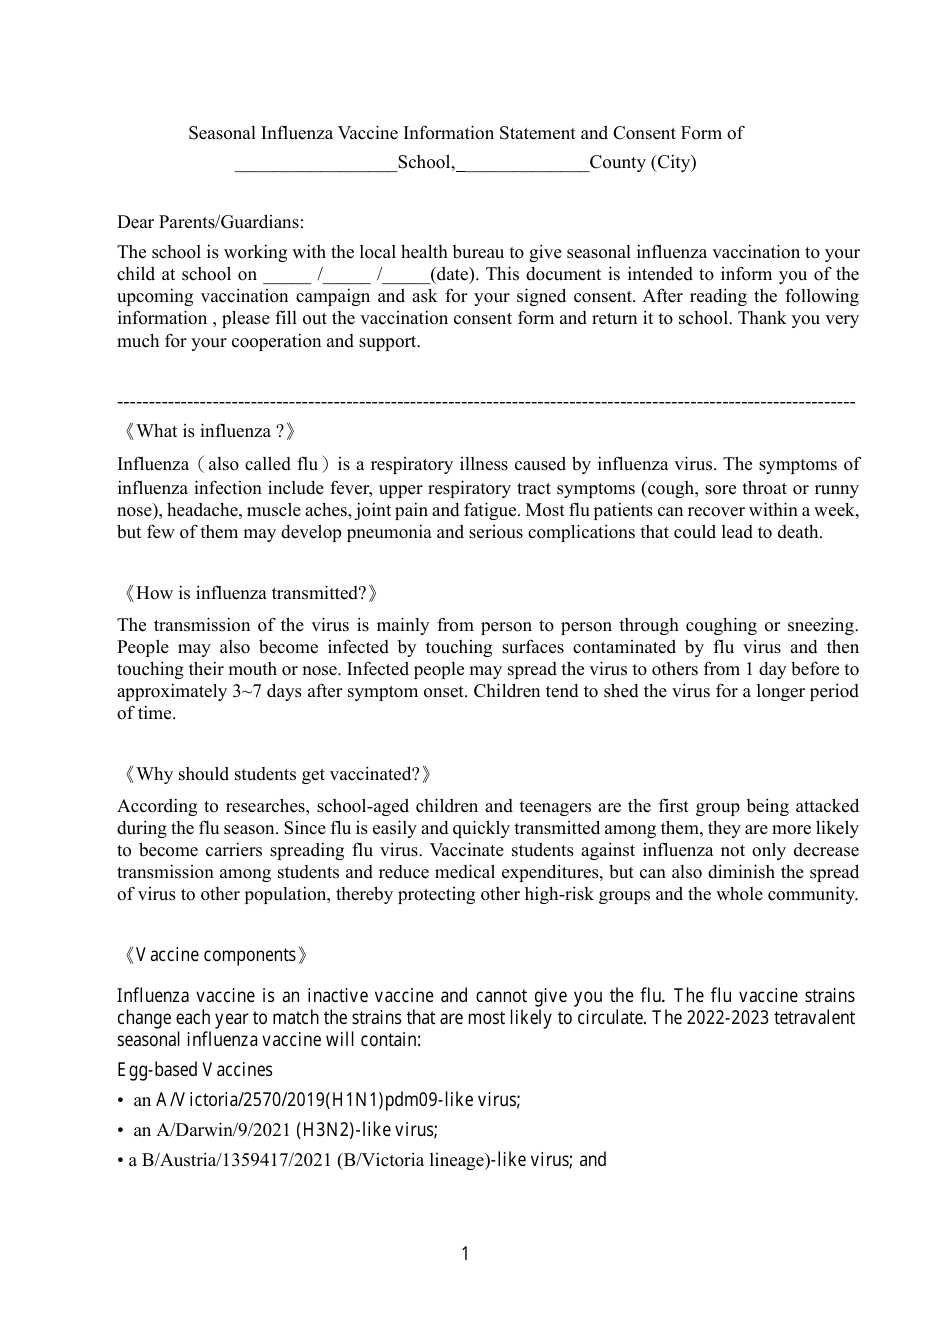 Seasonal Influenza Vaccine Information Statement and Consent Form - Taiwan, Page 1